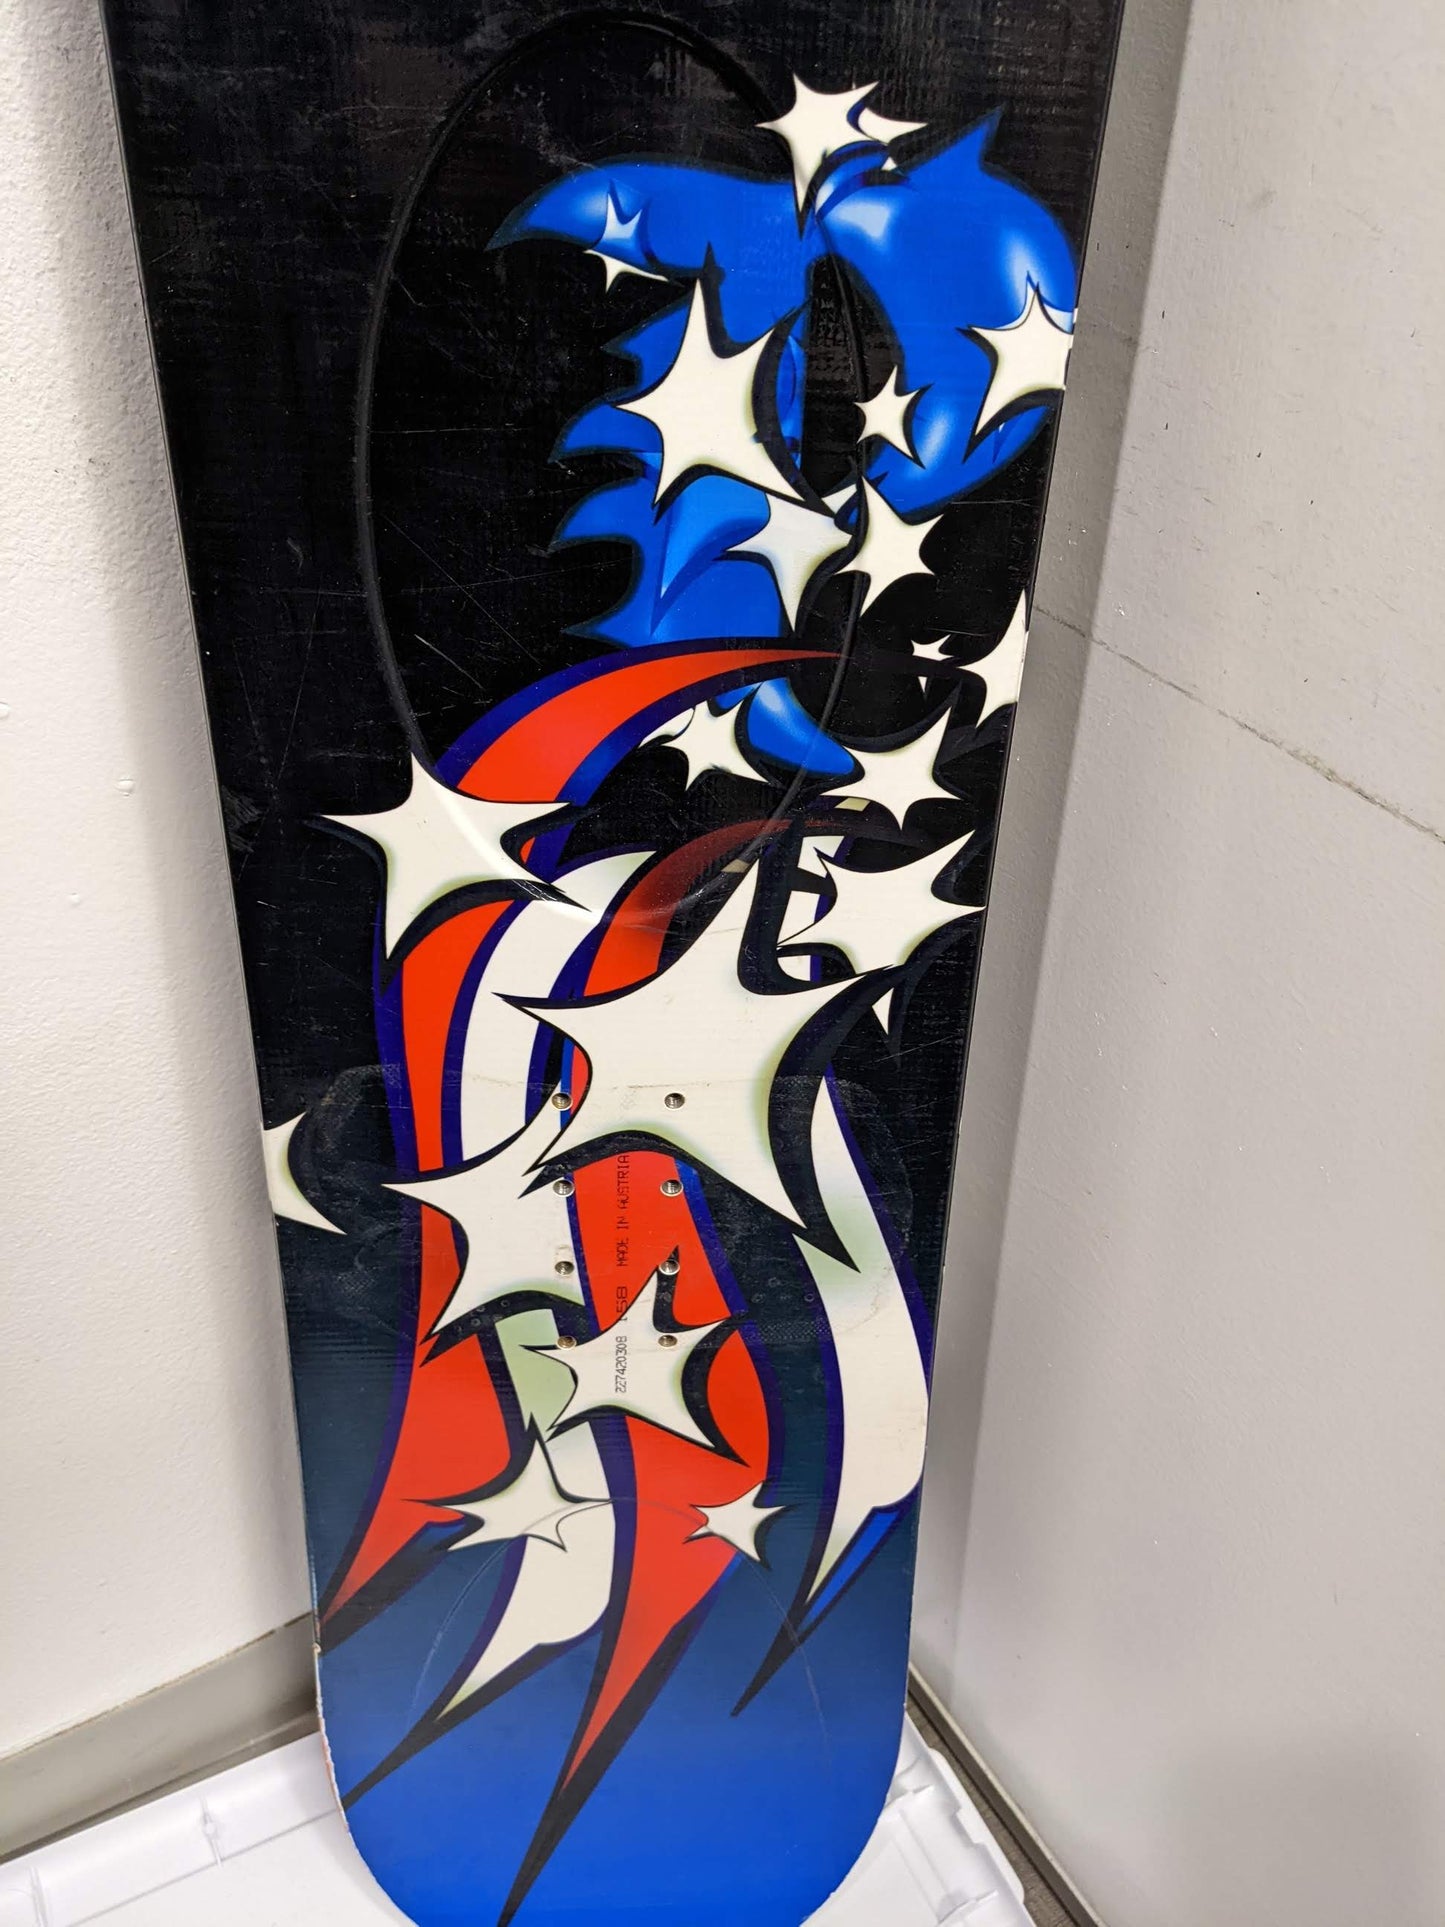 Bud Light Snowboard (Deck Only) Size 158 cm Blue Used